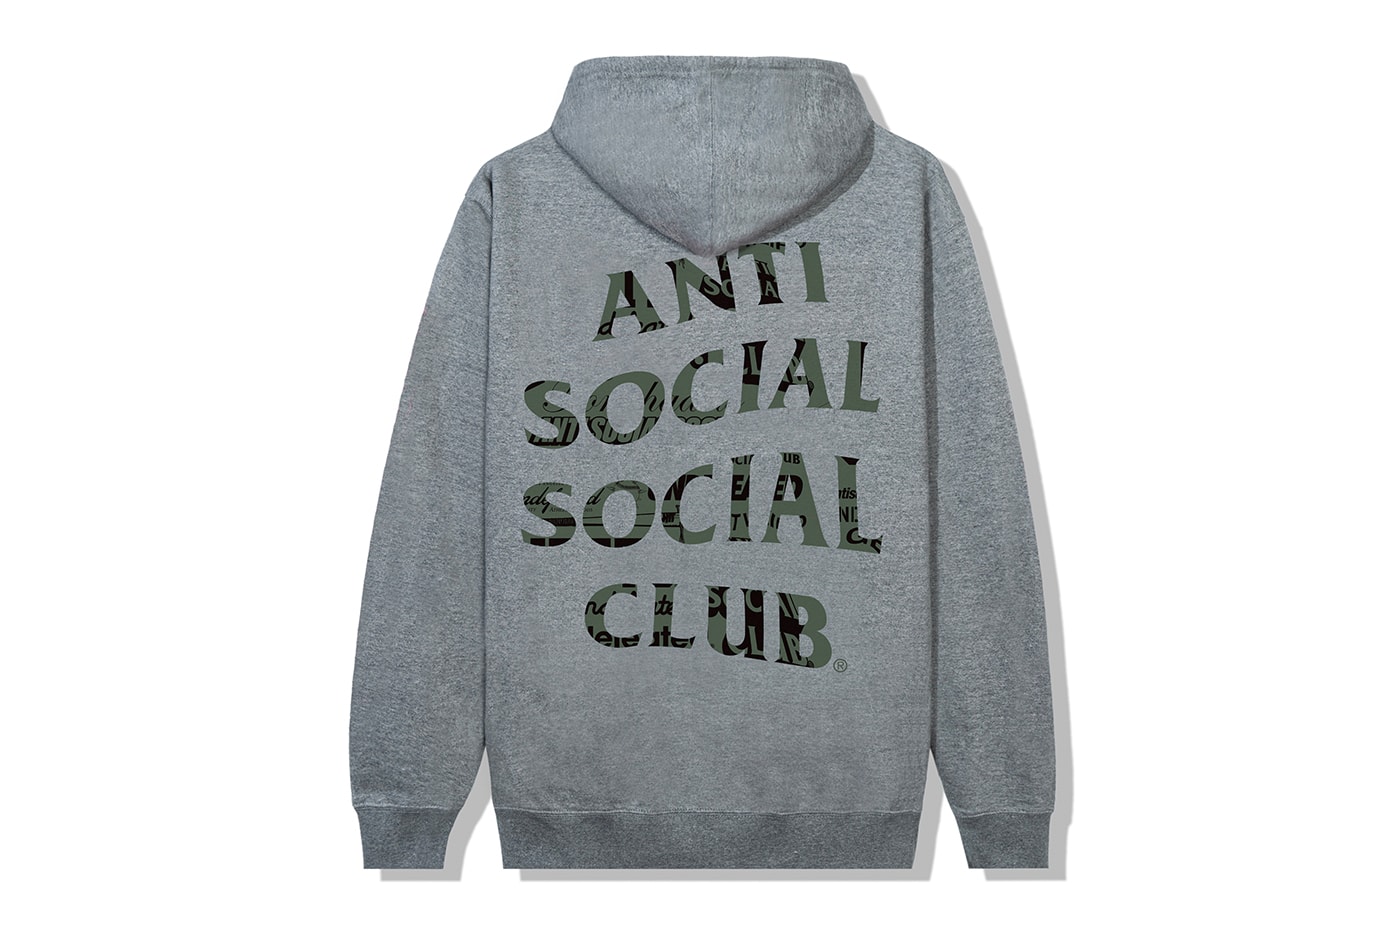 ANTI SOCIAL SOCIAL CLUB FW22 FALSE PROMISES Collection Full Look Release Info Date Buy Price UNDEFEATED Collaboration 